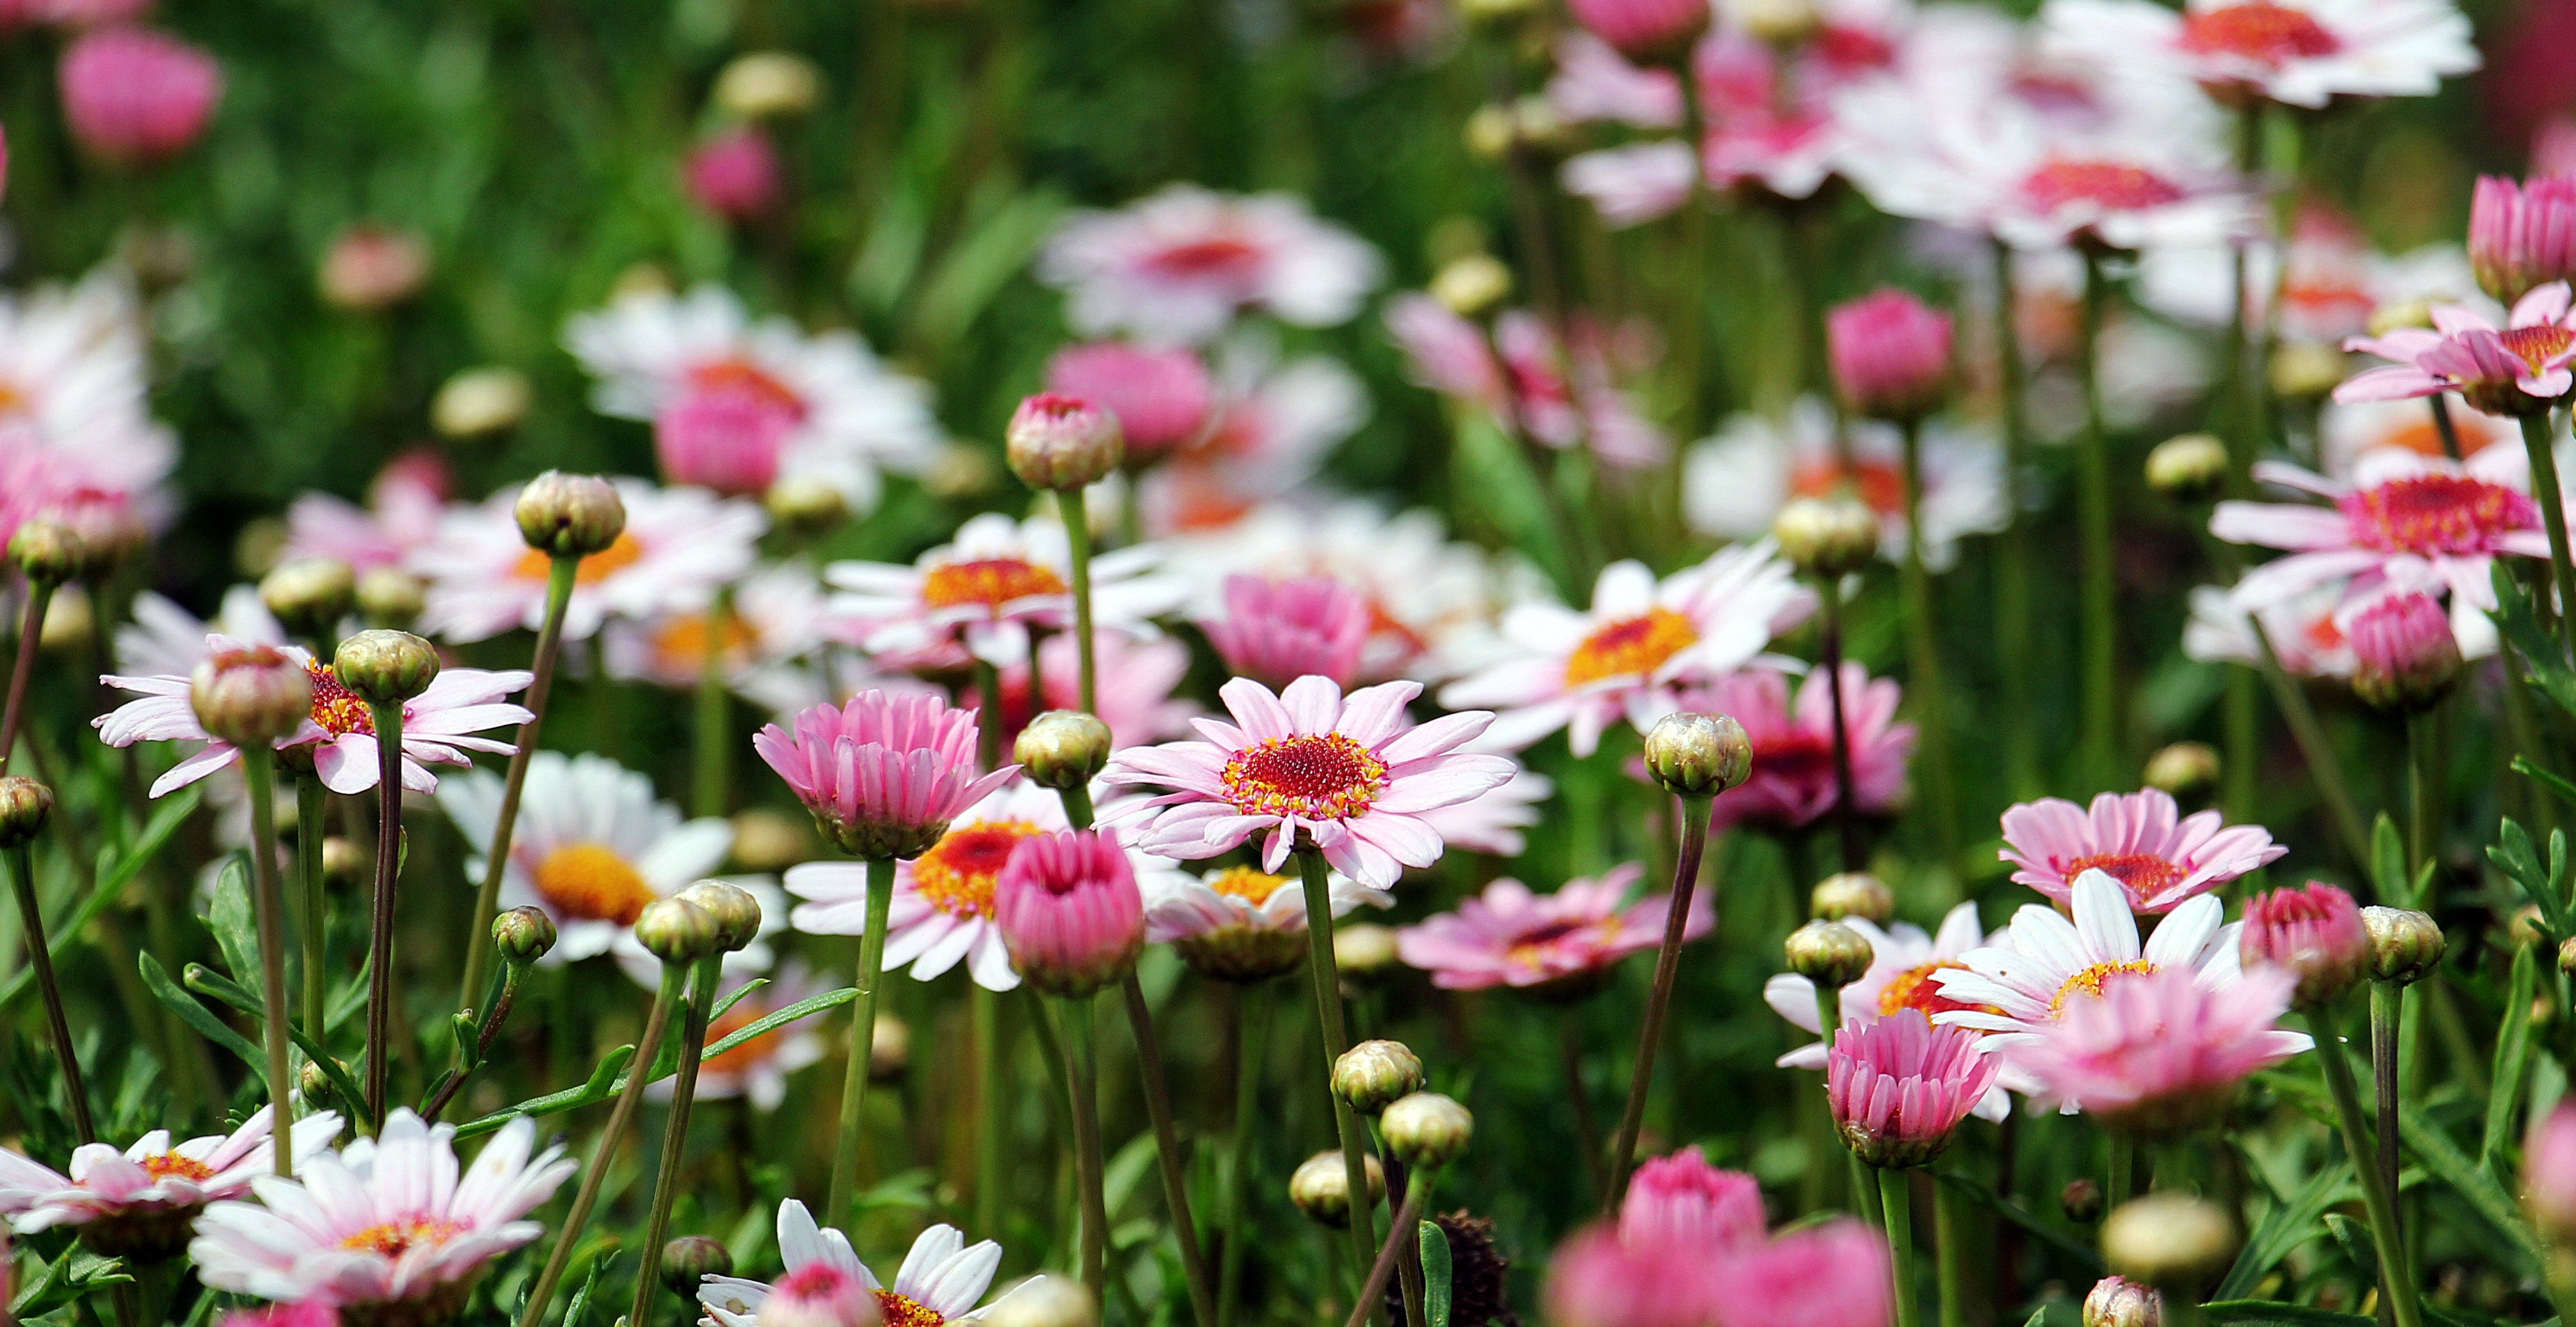 Free photo A glade with beautiful daisy flowers.